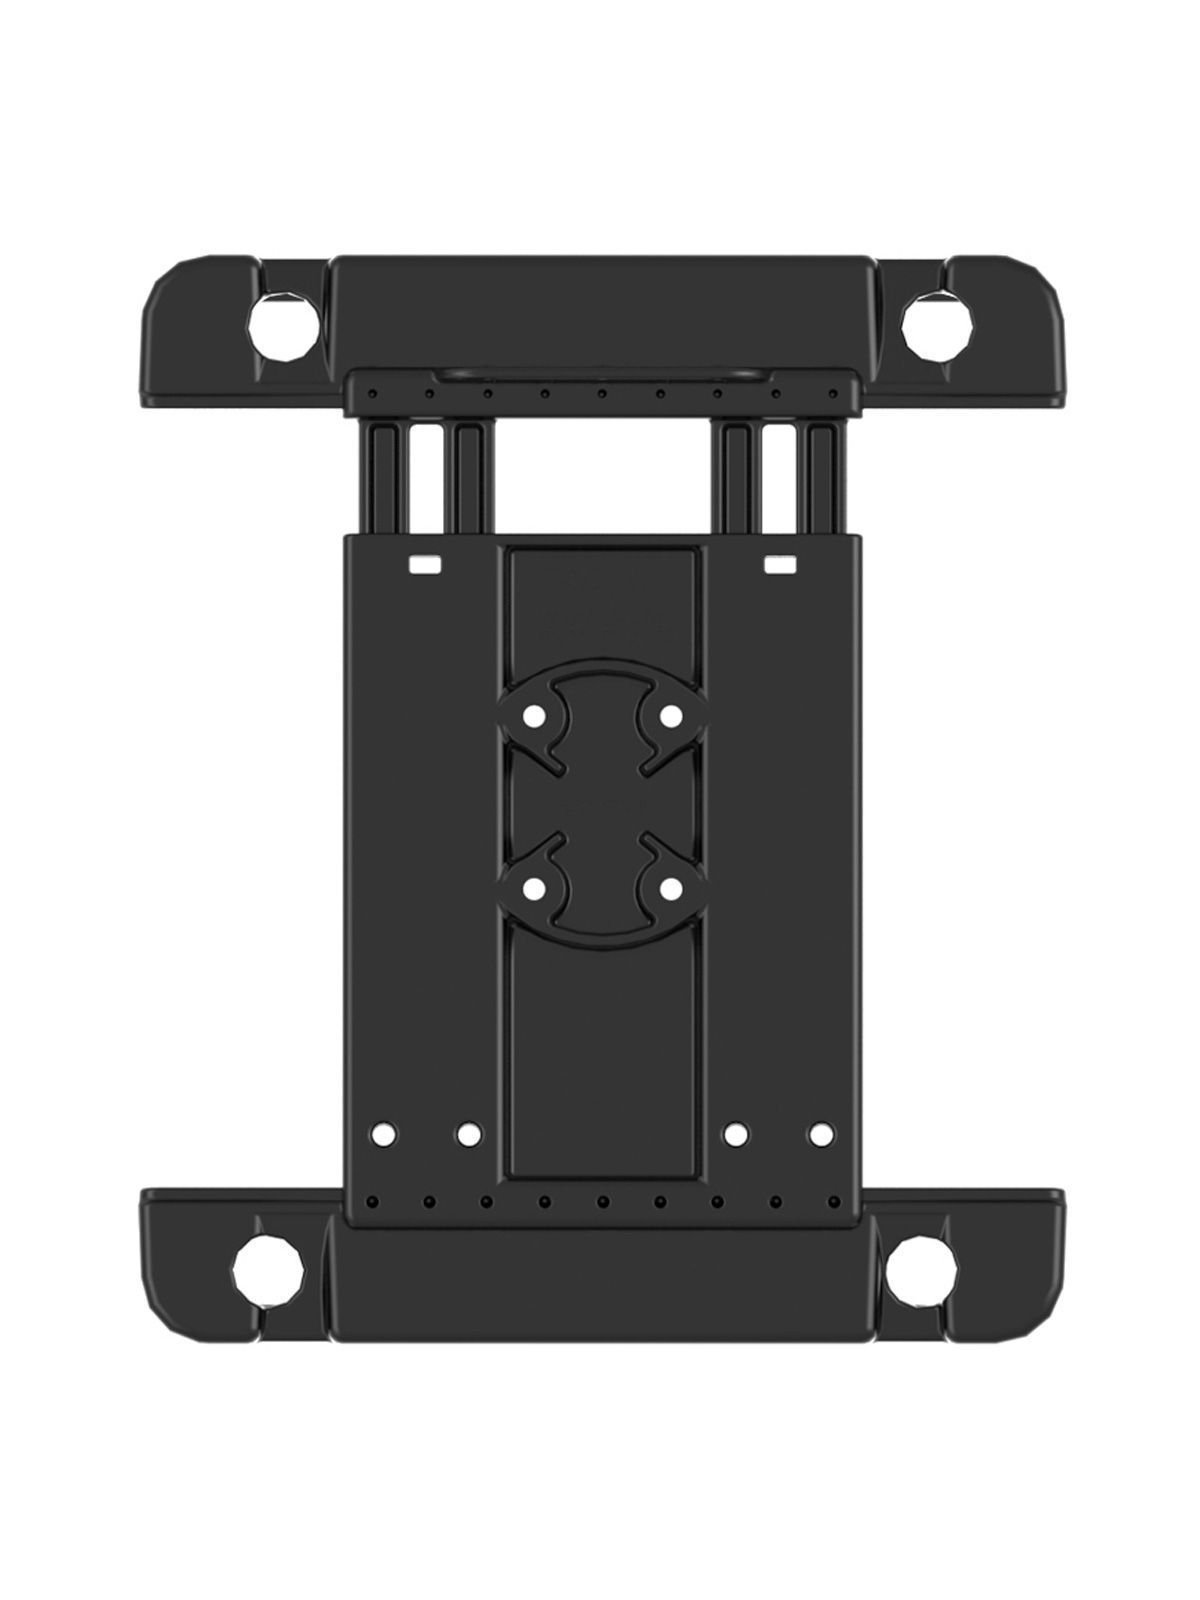 RAM MOUNTS Universal Tab-Tite Clamping Cradle - Apple iPad 1/2/3/4 (with or without sleeves)